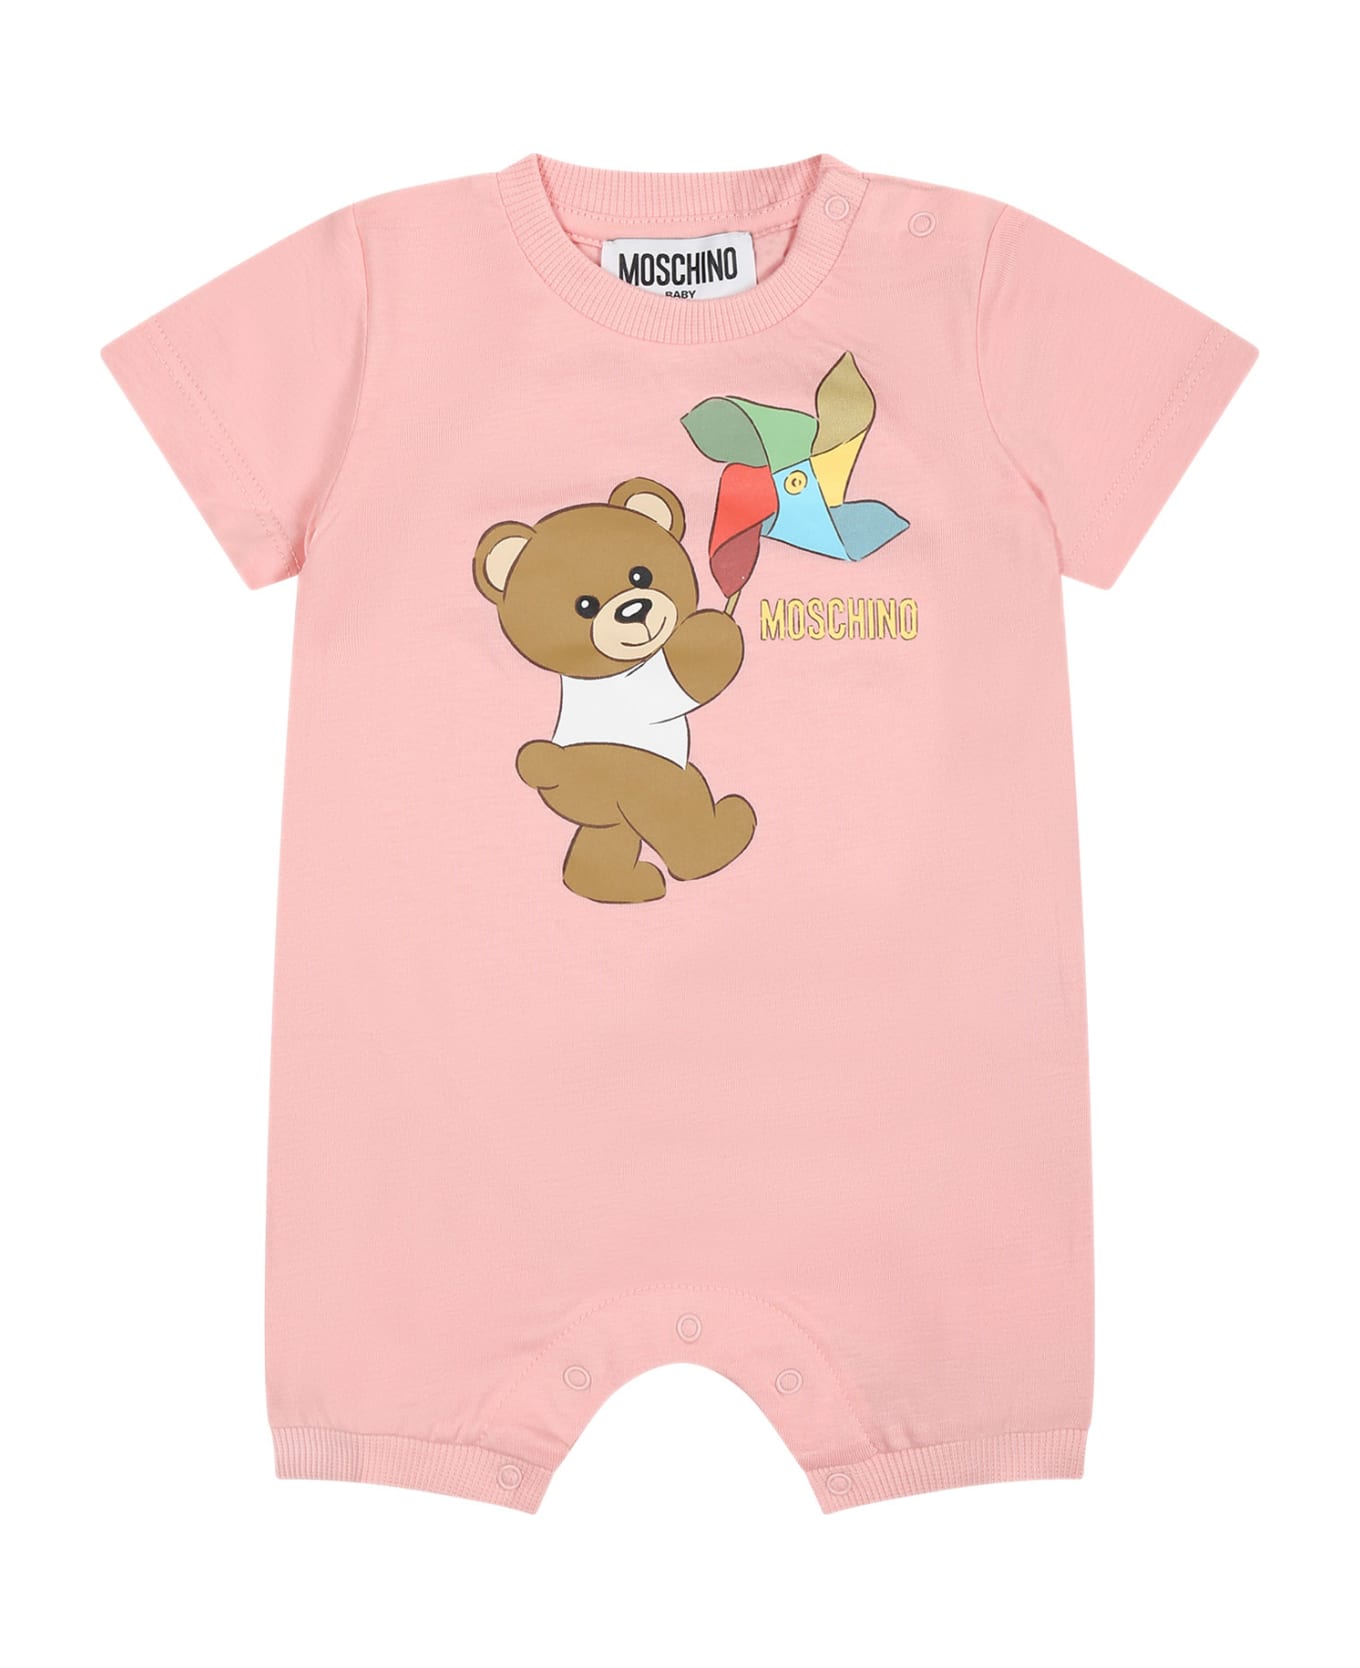 Moschino Pink Bodysuit For Babies With Teddy Bear And Pinwheel - Pink ボディスーツ＆セットアップ